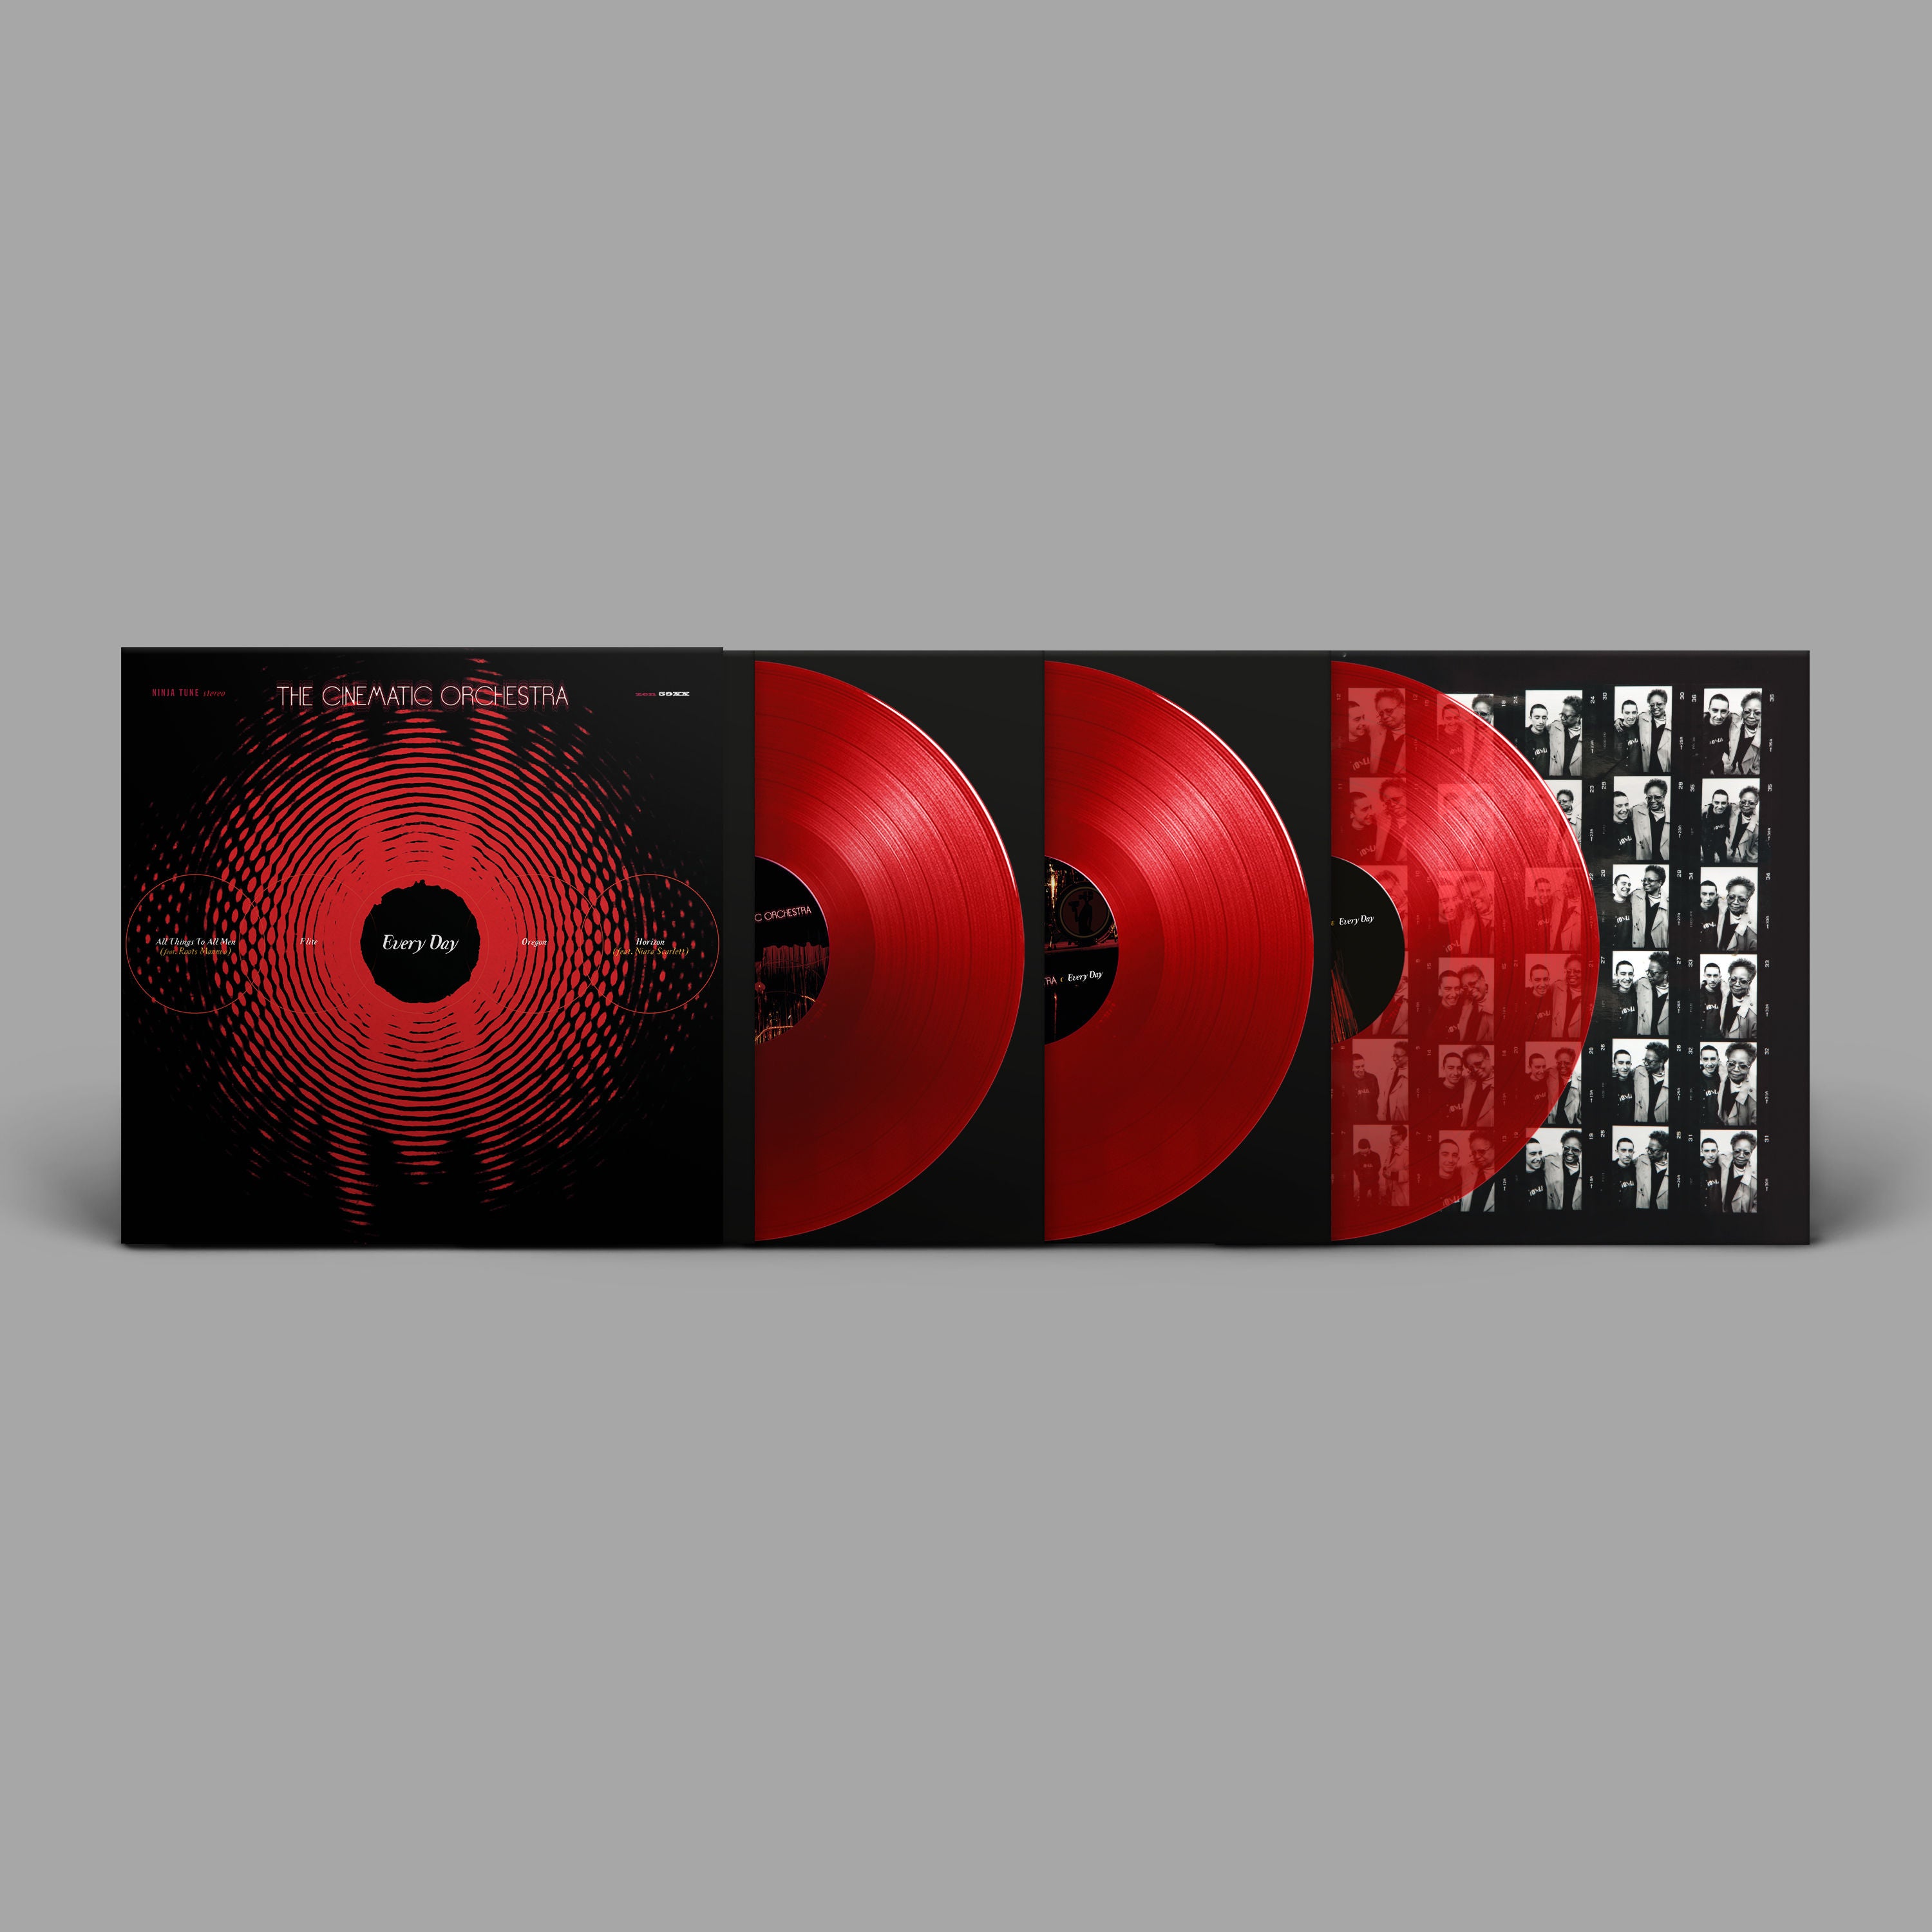 Every Day: Limited Edition 20th Anniversary Translucent Red Vinyl 3LP